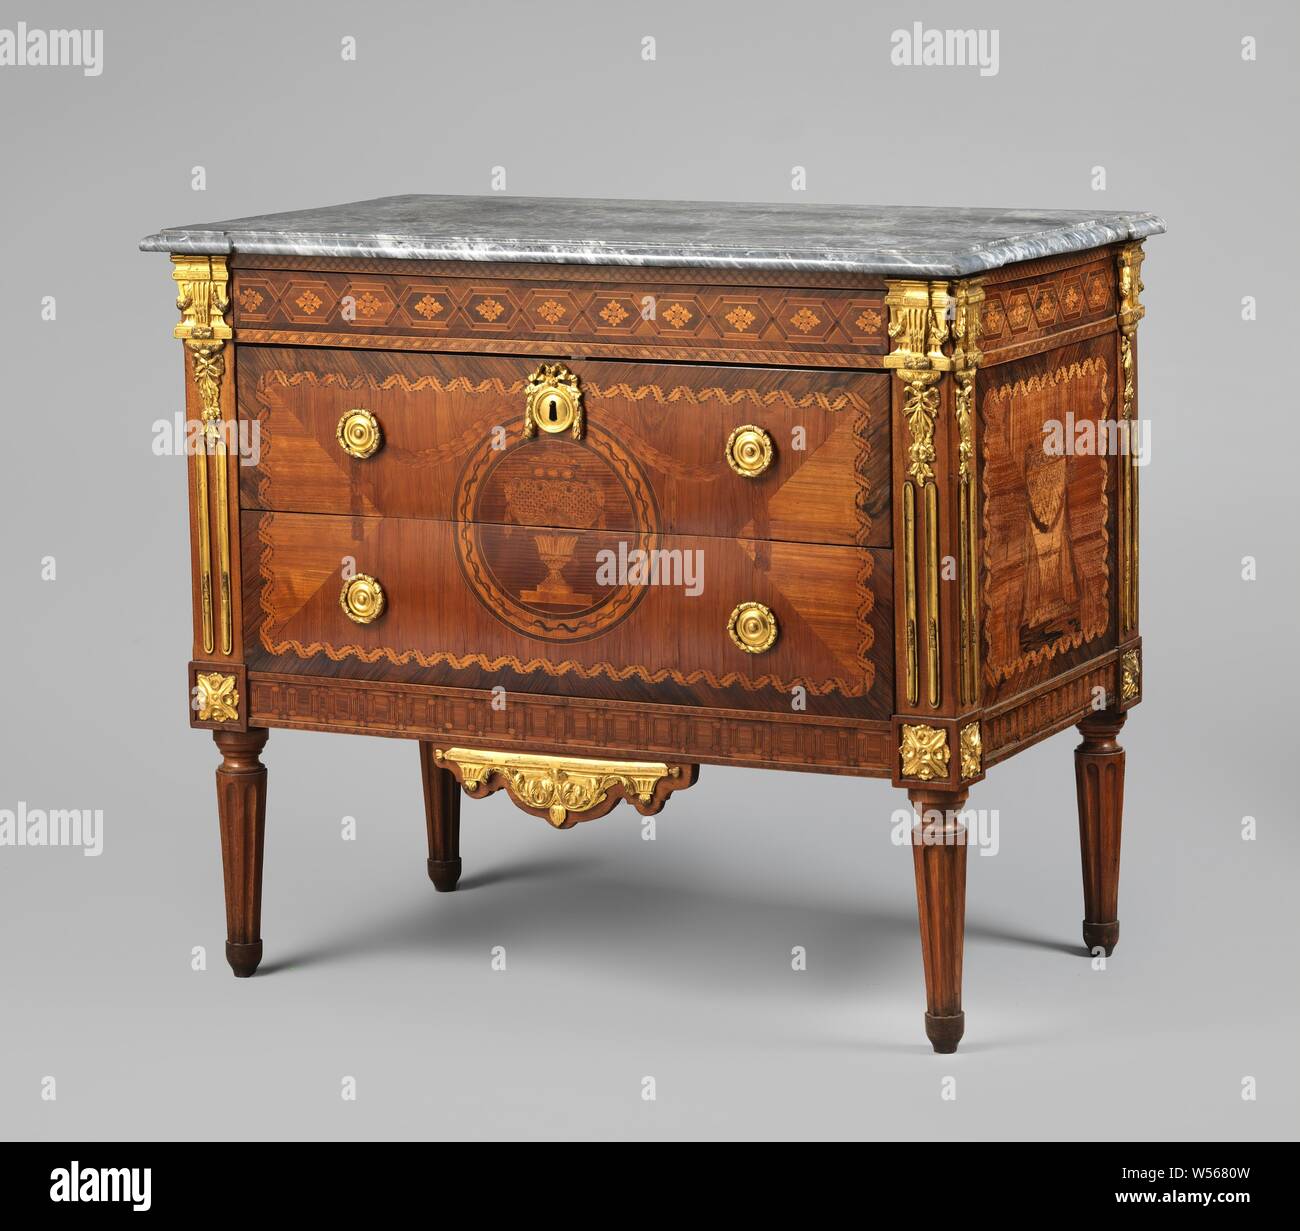 Dresser With Three Drawers With Marketery Decorations Including A